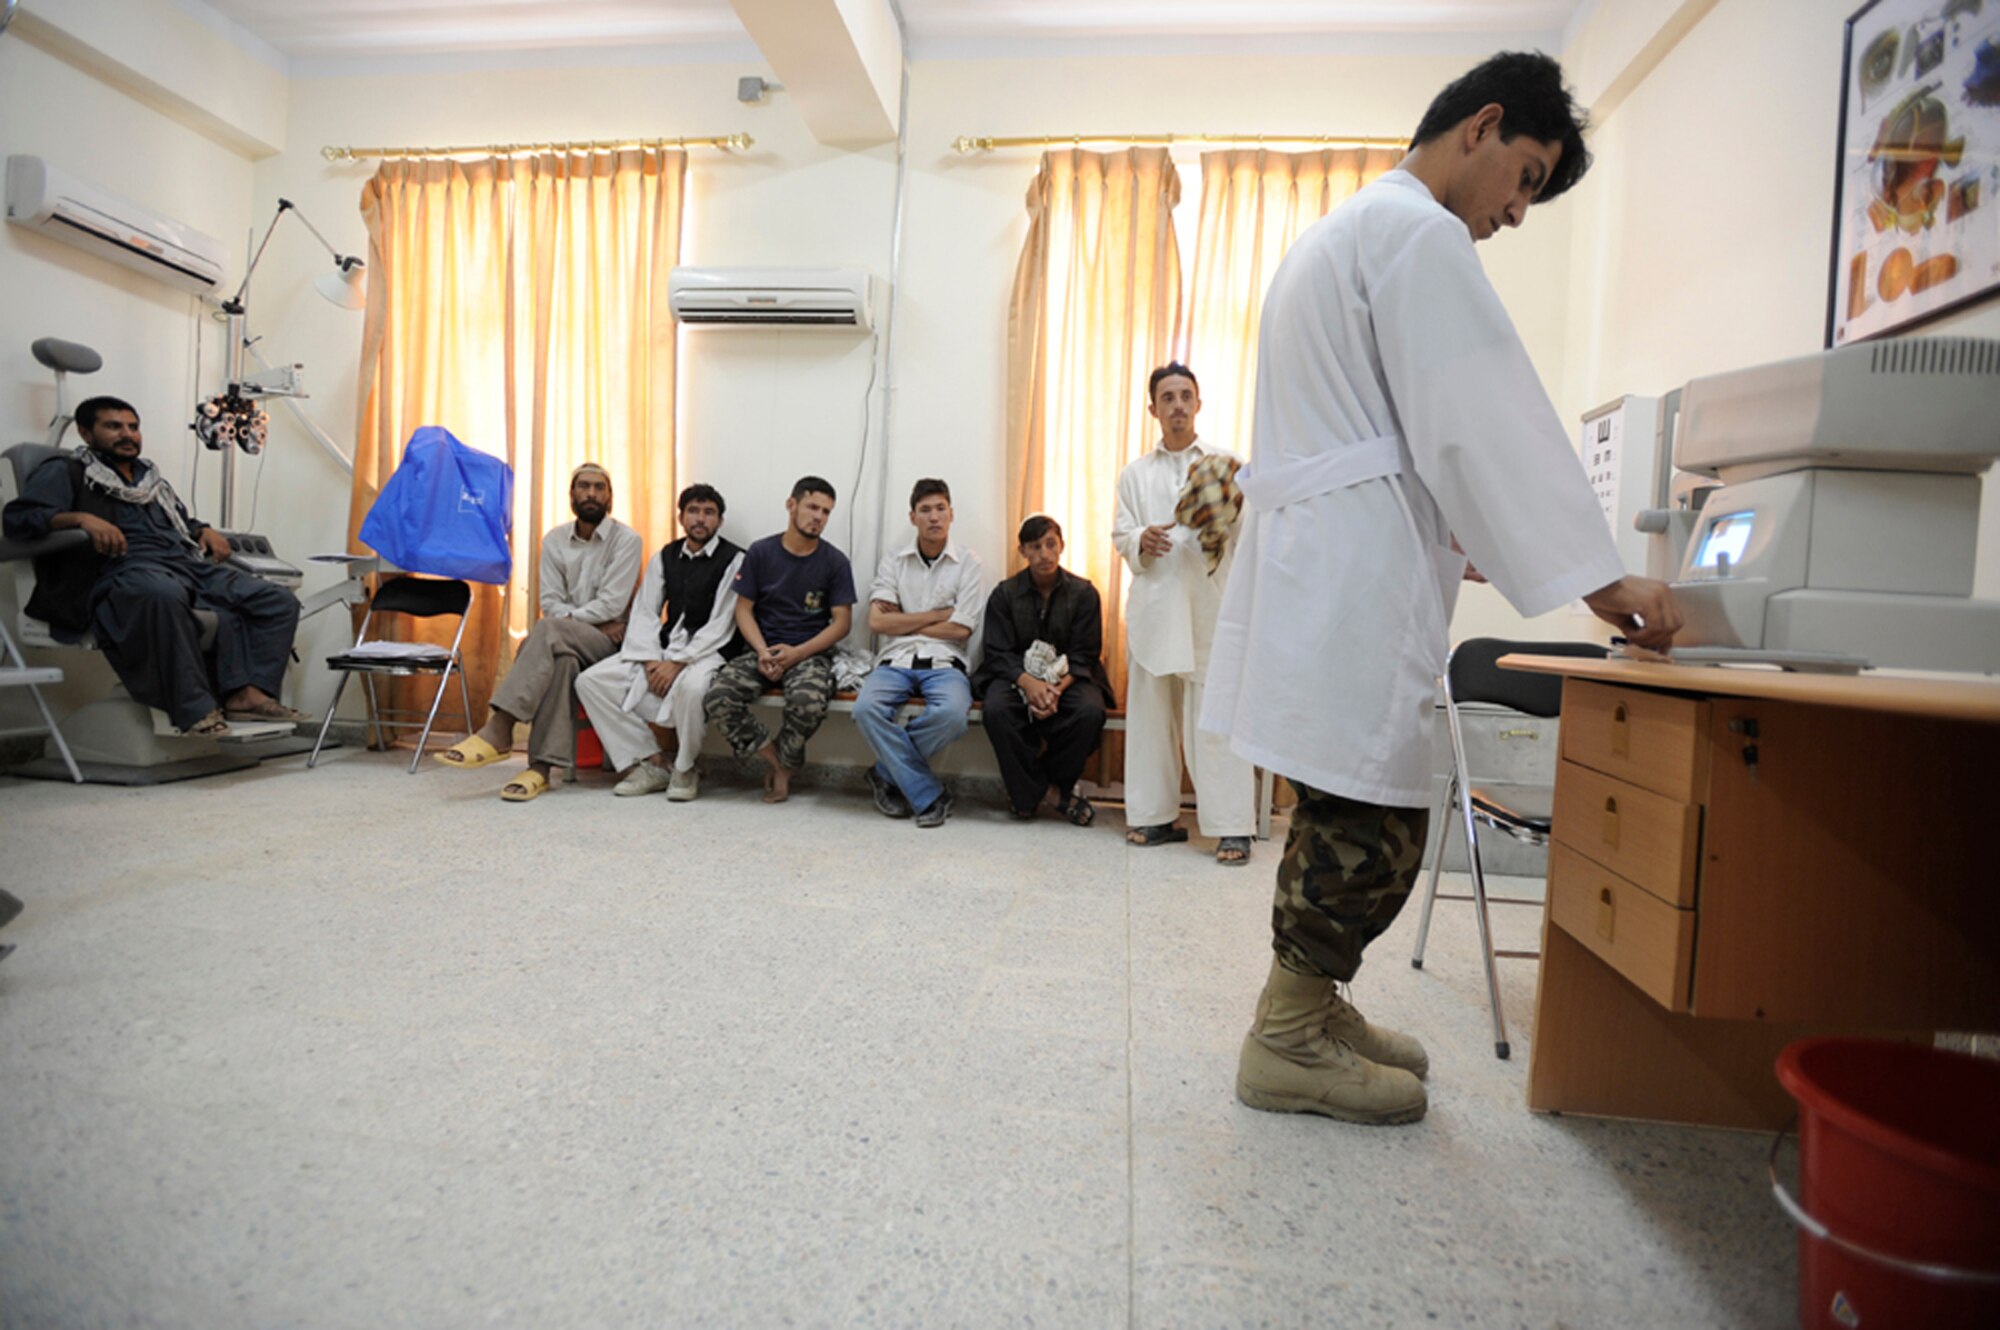 Recruits for the Afghan national army wait to have their vision screened during medical inprocessing Aug 2, 2009 at the Kabul military training center, Afghanistan. The medical screening process consists of a drug urinalysis, physical screening and eye exam. (U.S. Air Force photo/Staff Sgt. Shawn Weismiller) 